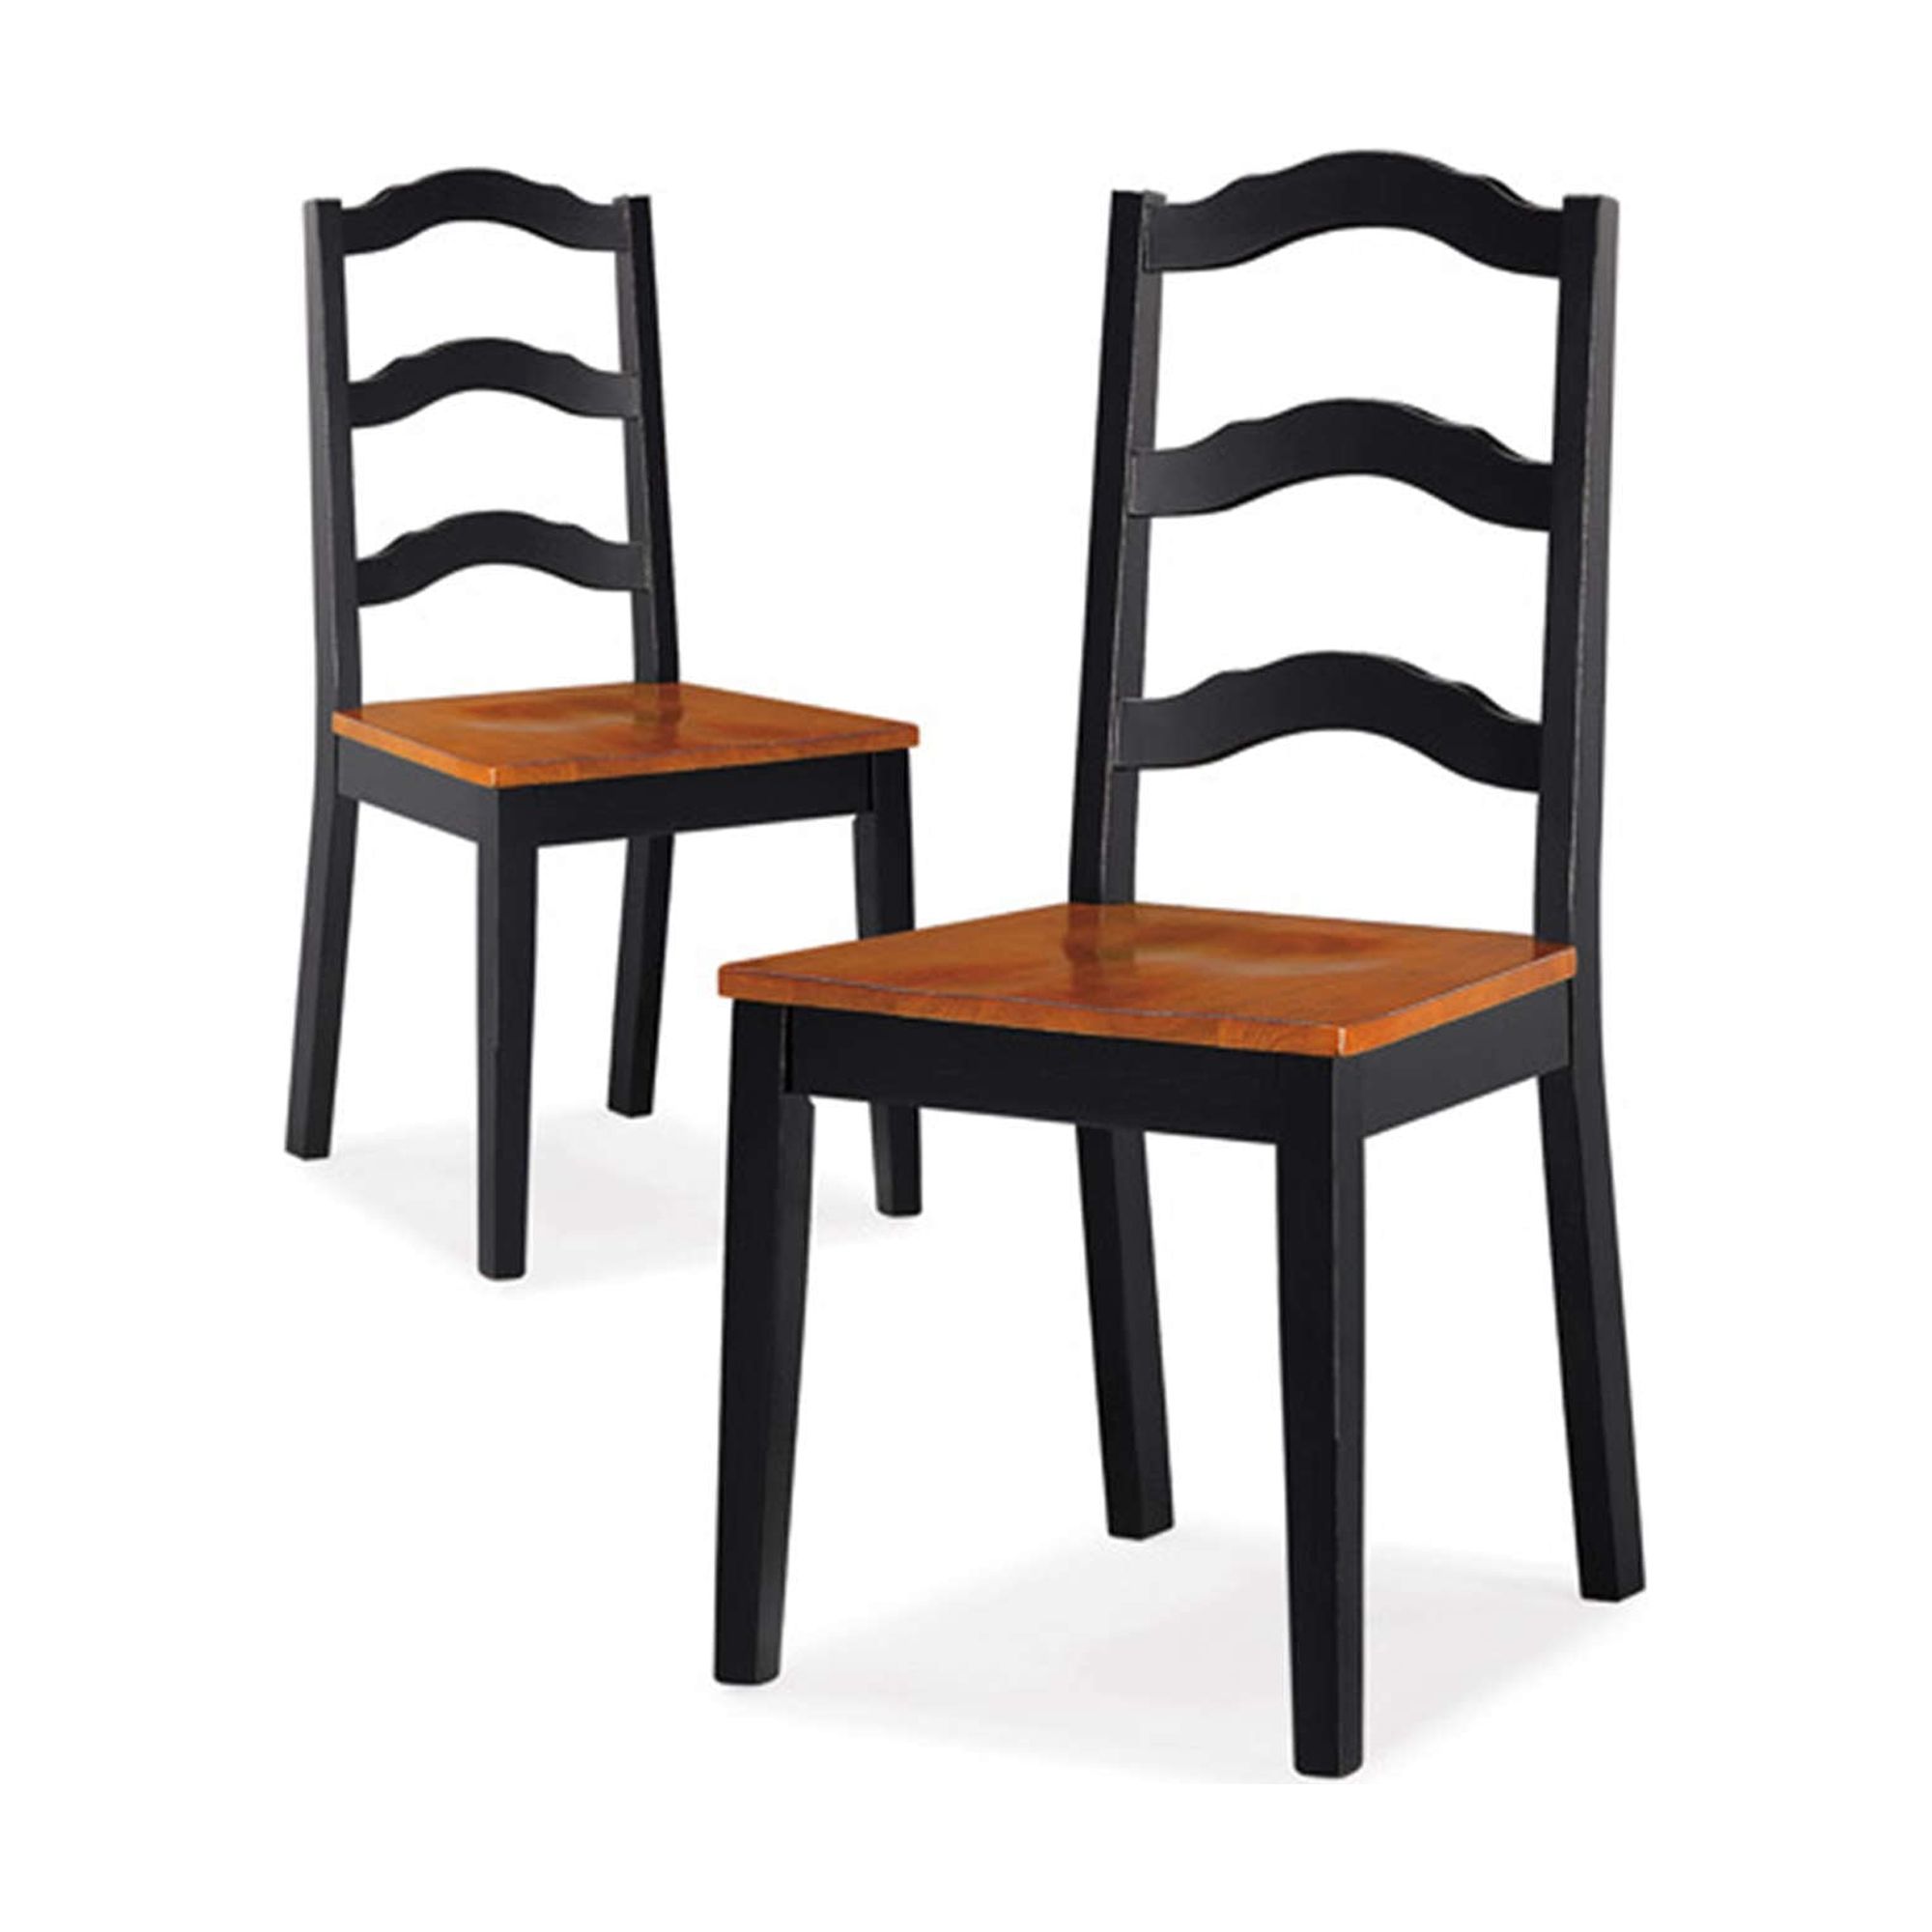 Better Homes and Gardens Autumn Lane Ladder Back Dining Chairs, Set of 2, Black and Oak - image 1 of 2